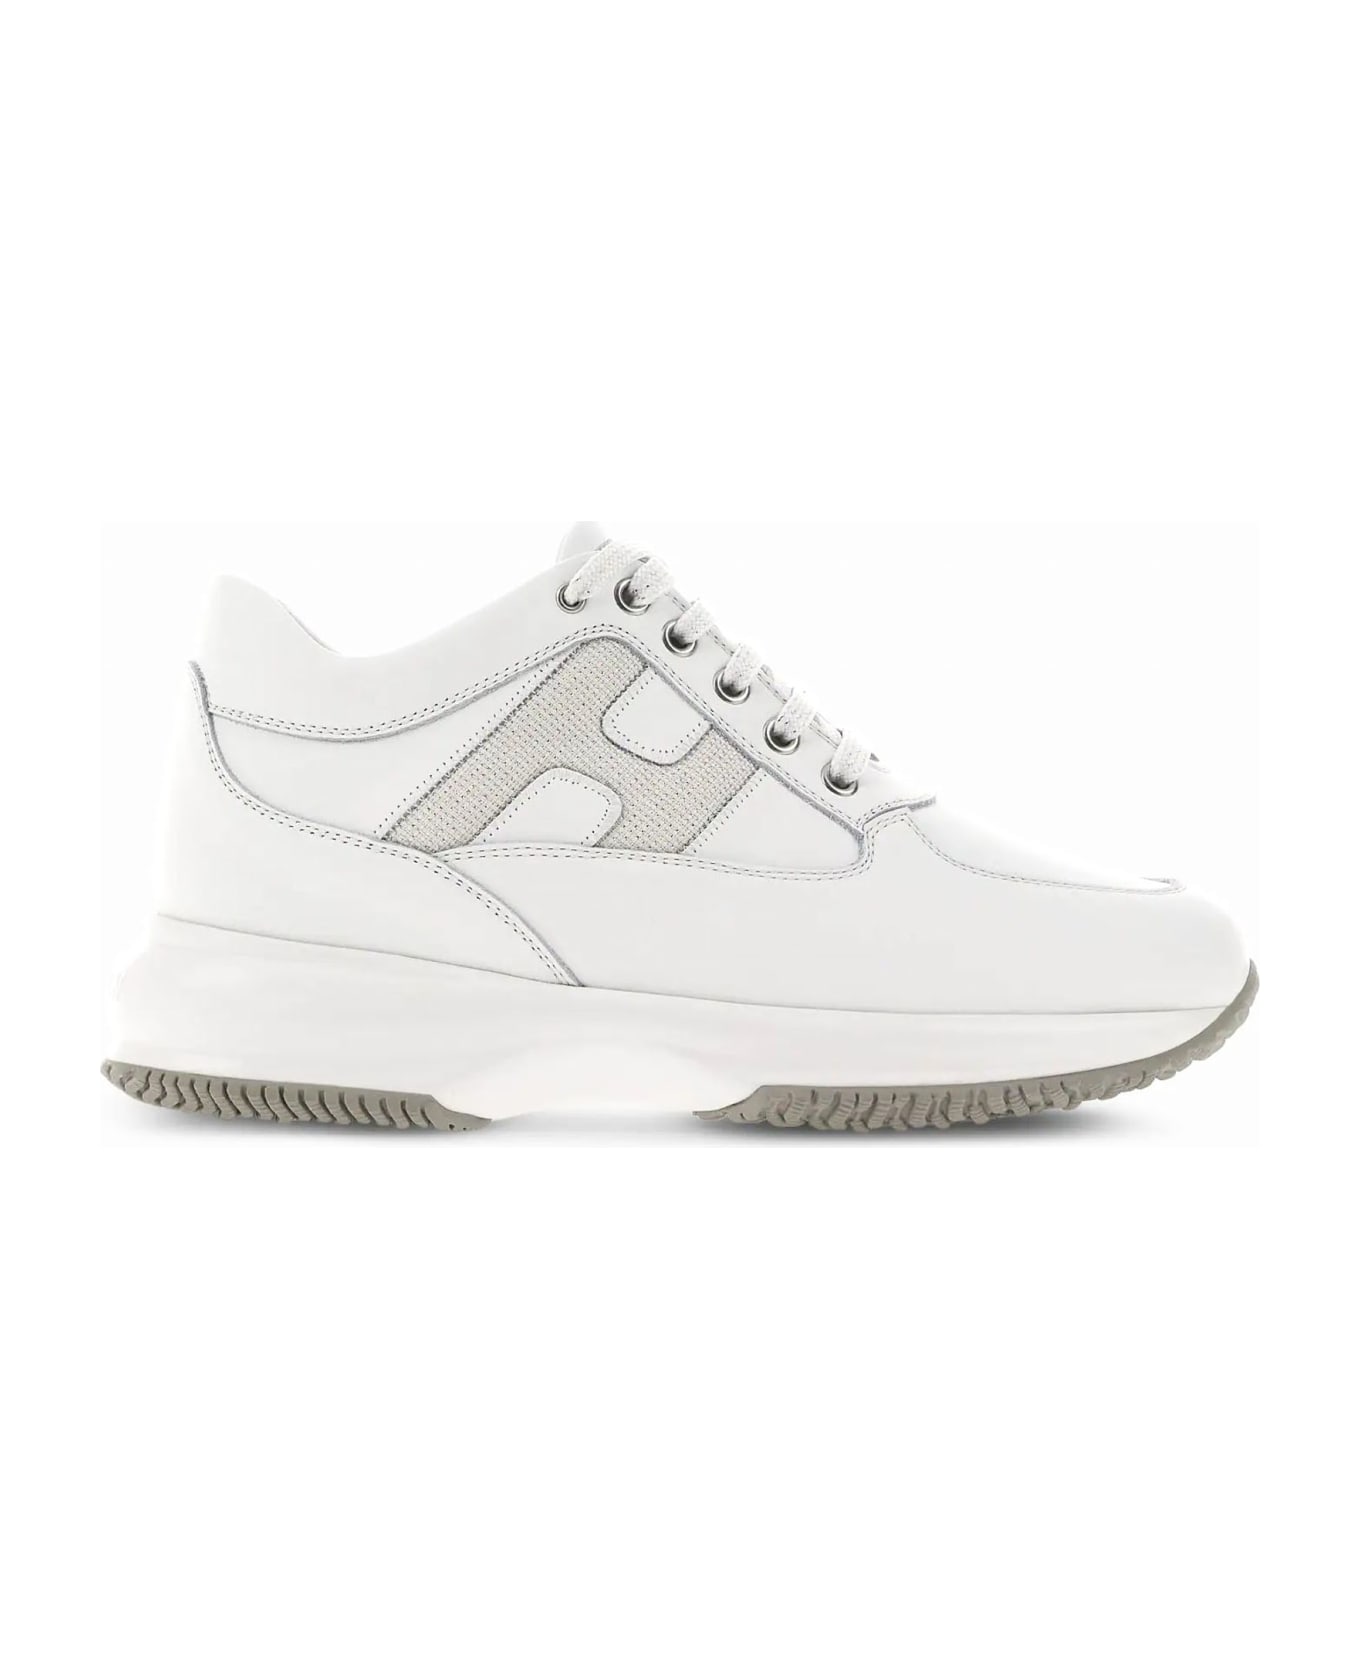 Hogan Interactive Leather Sneakers - White スニーカー